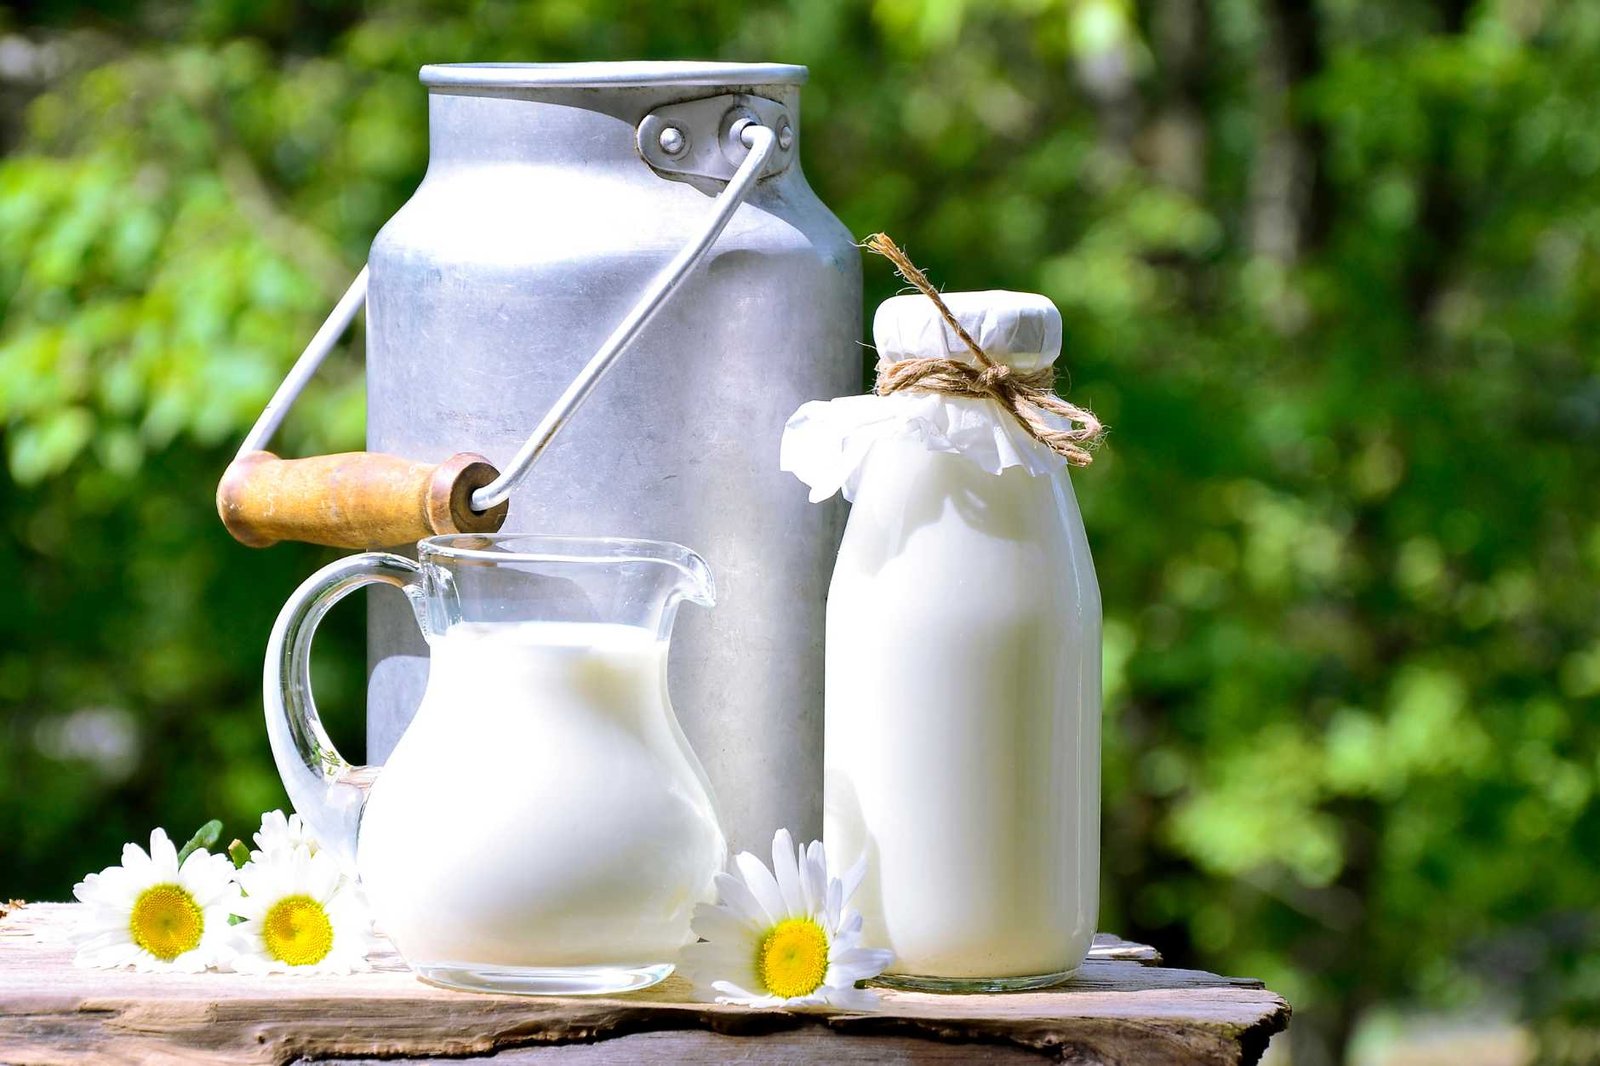 The Benefits of Drinking Raw Milk vs. Pasteurized Milk